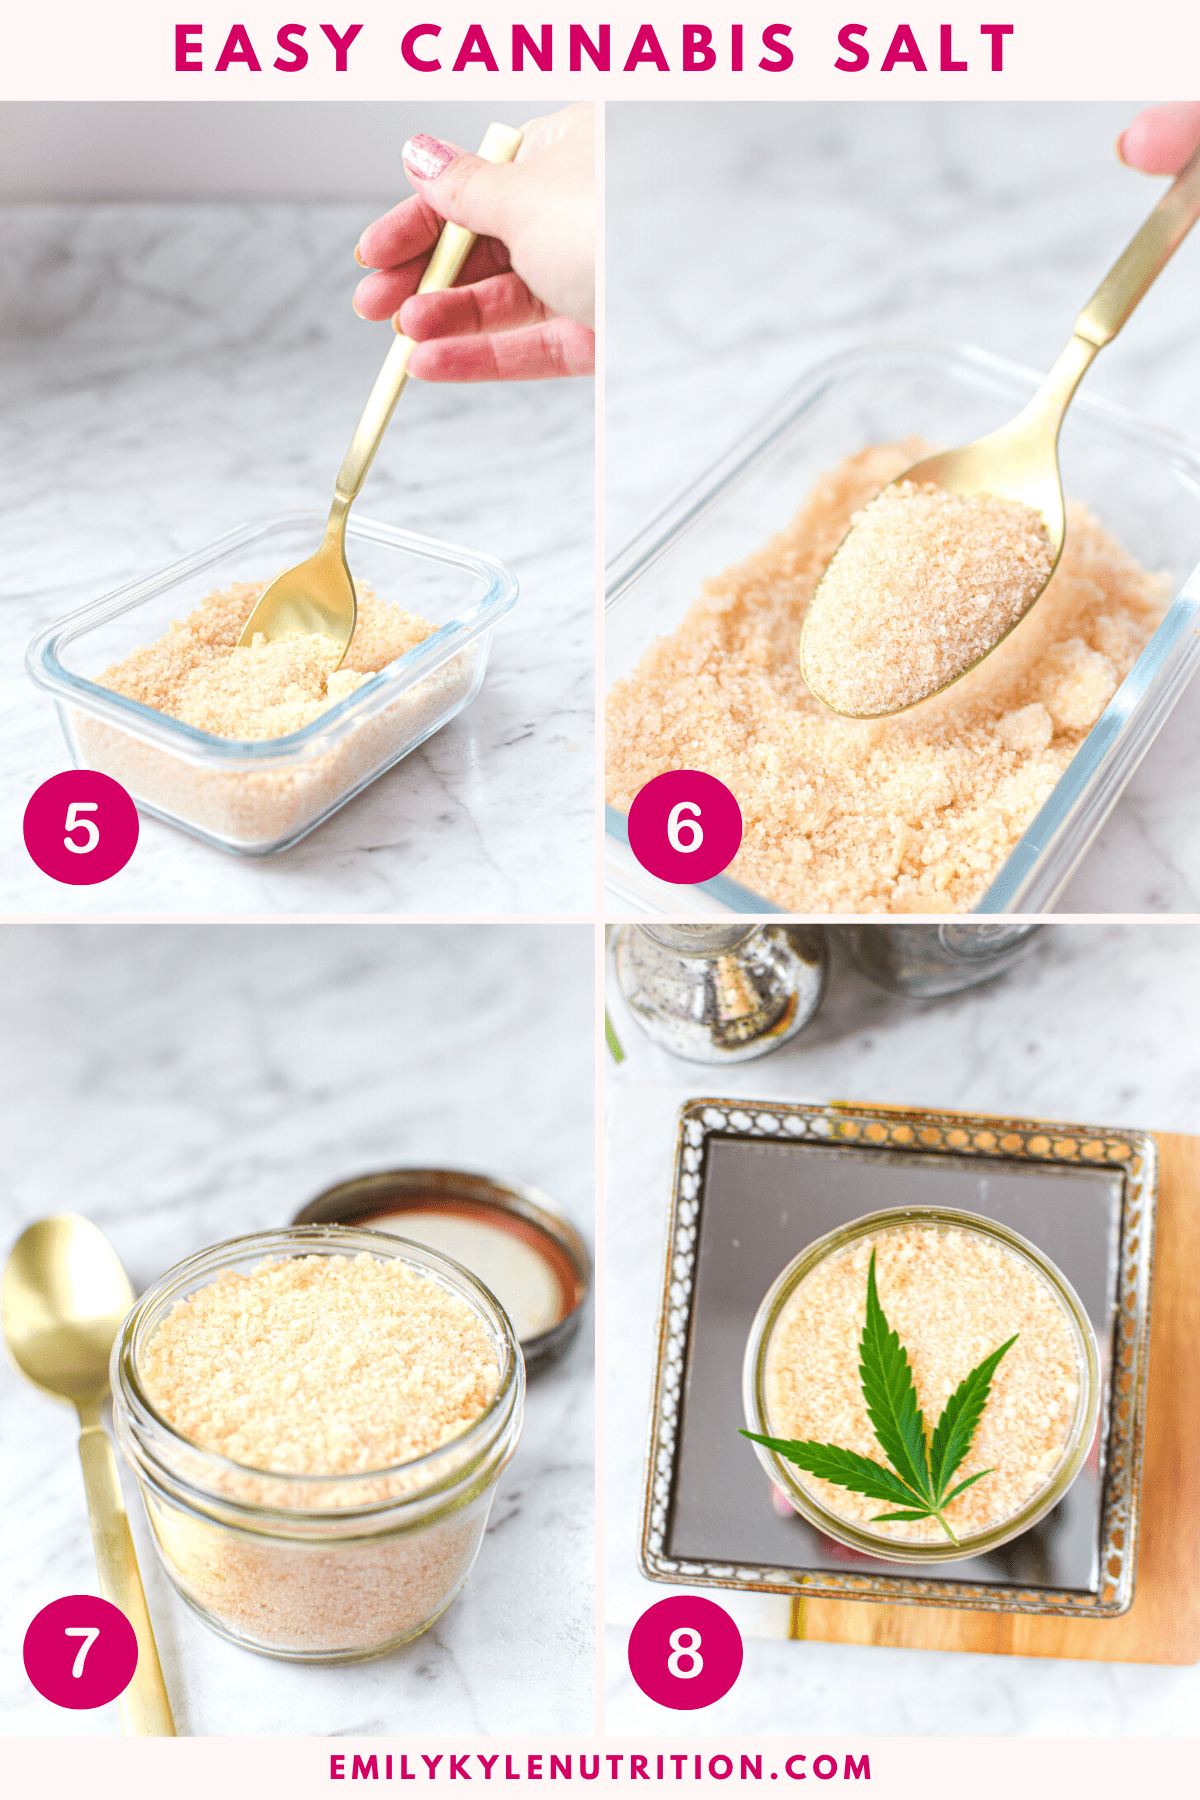 A 4 step image collage showing the last 4 steps to making cannabis salt from stirring the salt, and up close image in the spoon, a final mason jar, and the jar garnished with a leaf